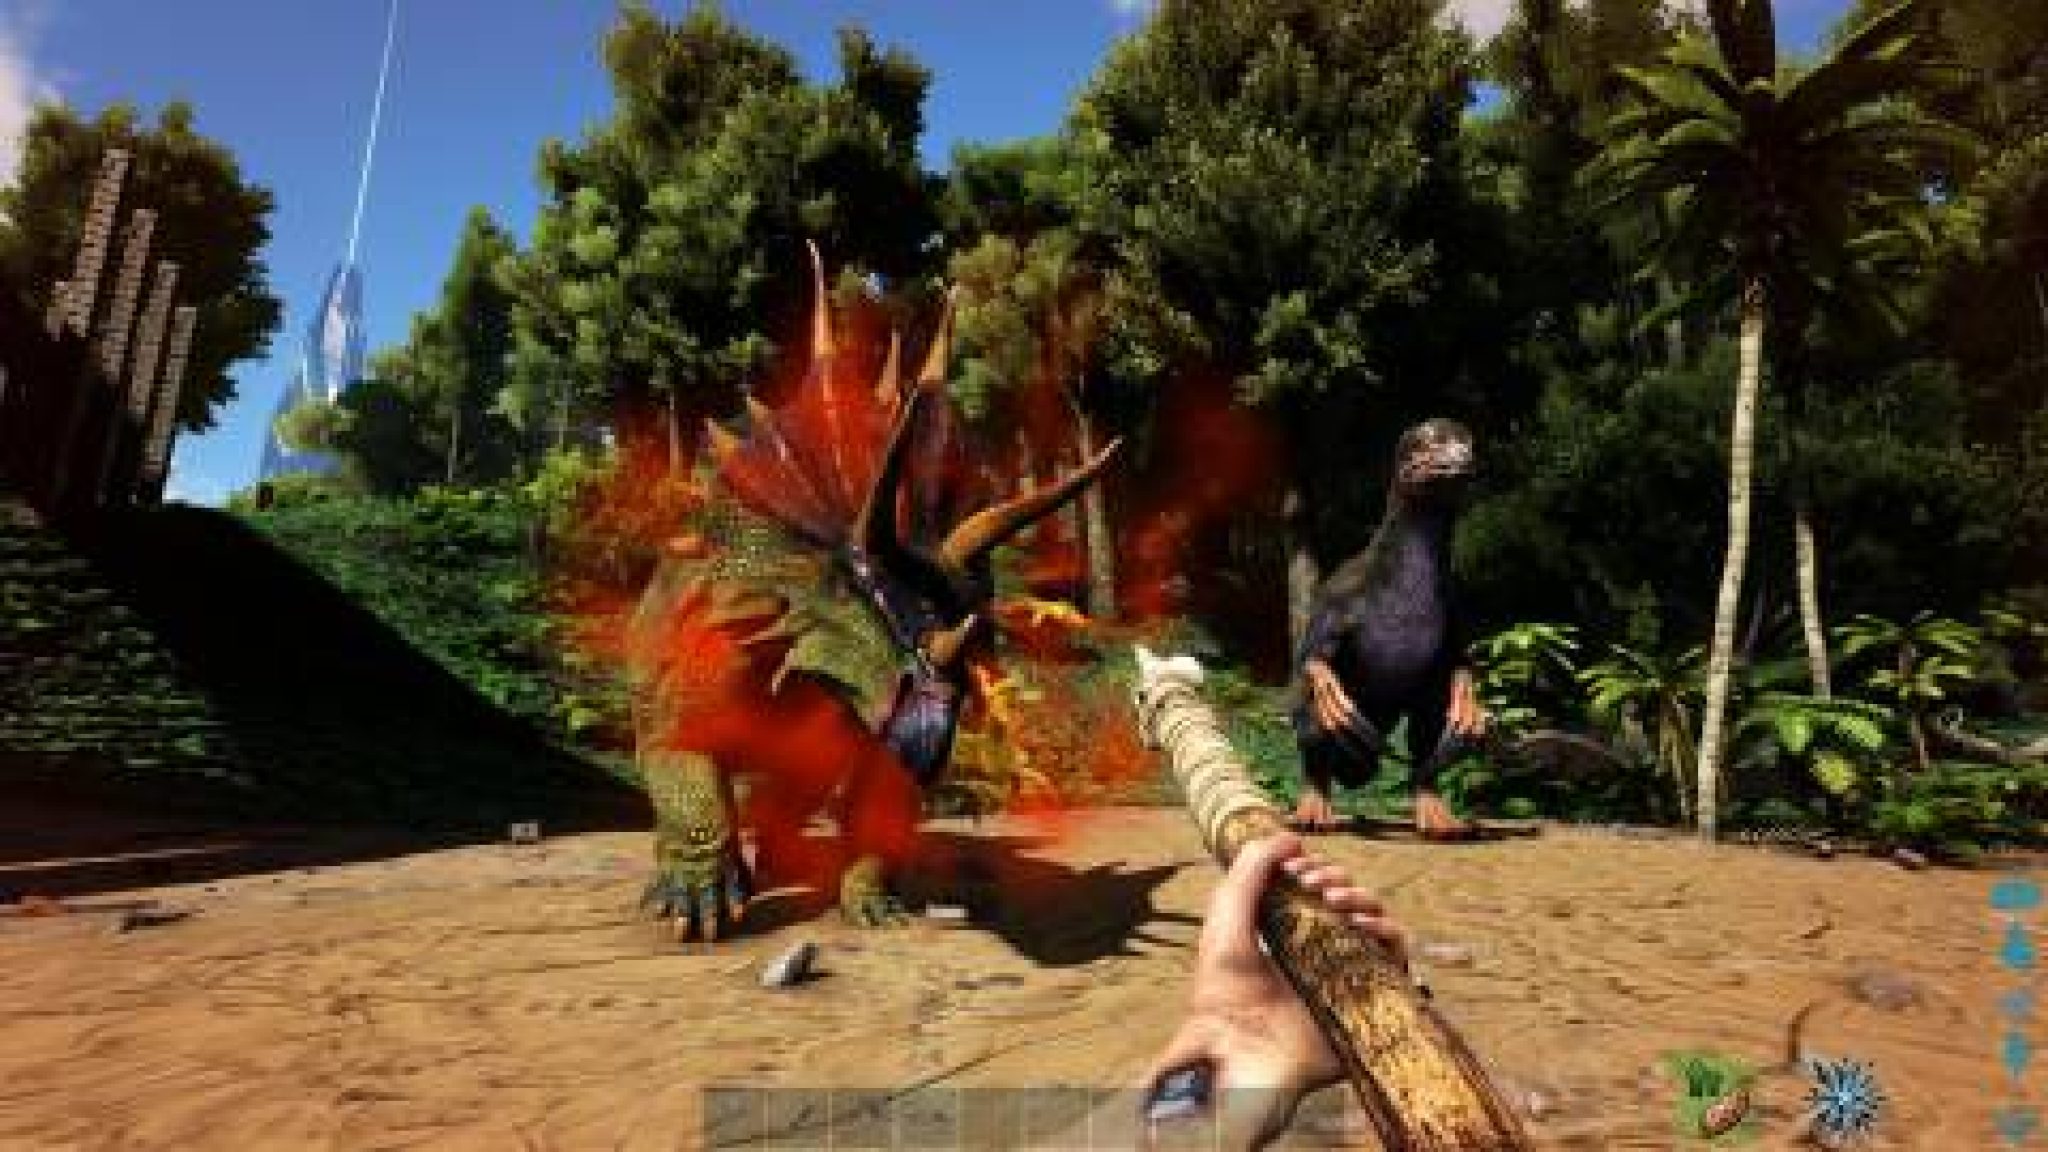 download the new version for ipod ARK: Survival Evolved